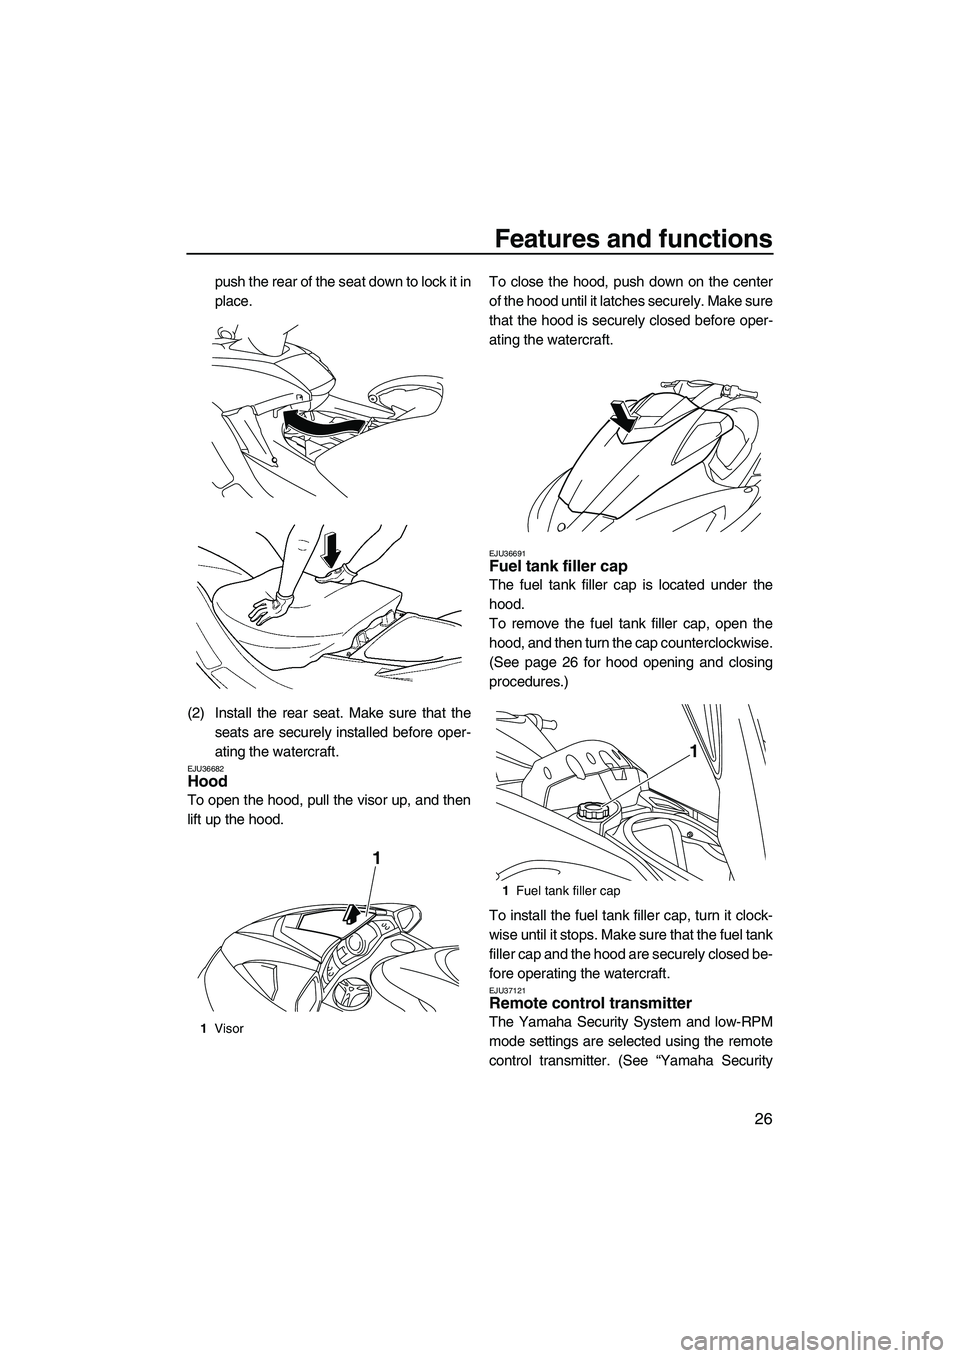 YAMAHA SVHO 2009 Owners Guide Features and functions
26
push the rear of the seat down to lock it in
place.
(2) Install the rear seat. Make sure that the
seats are securely installed before oper-
ating the watercraft.
EJU36682Hood